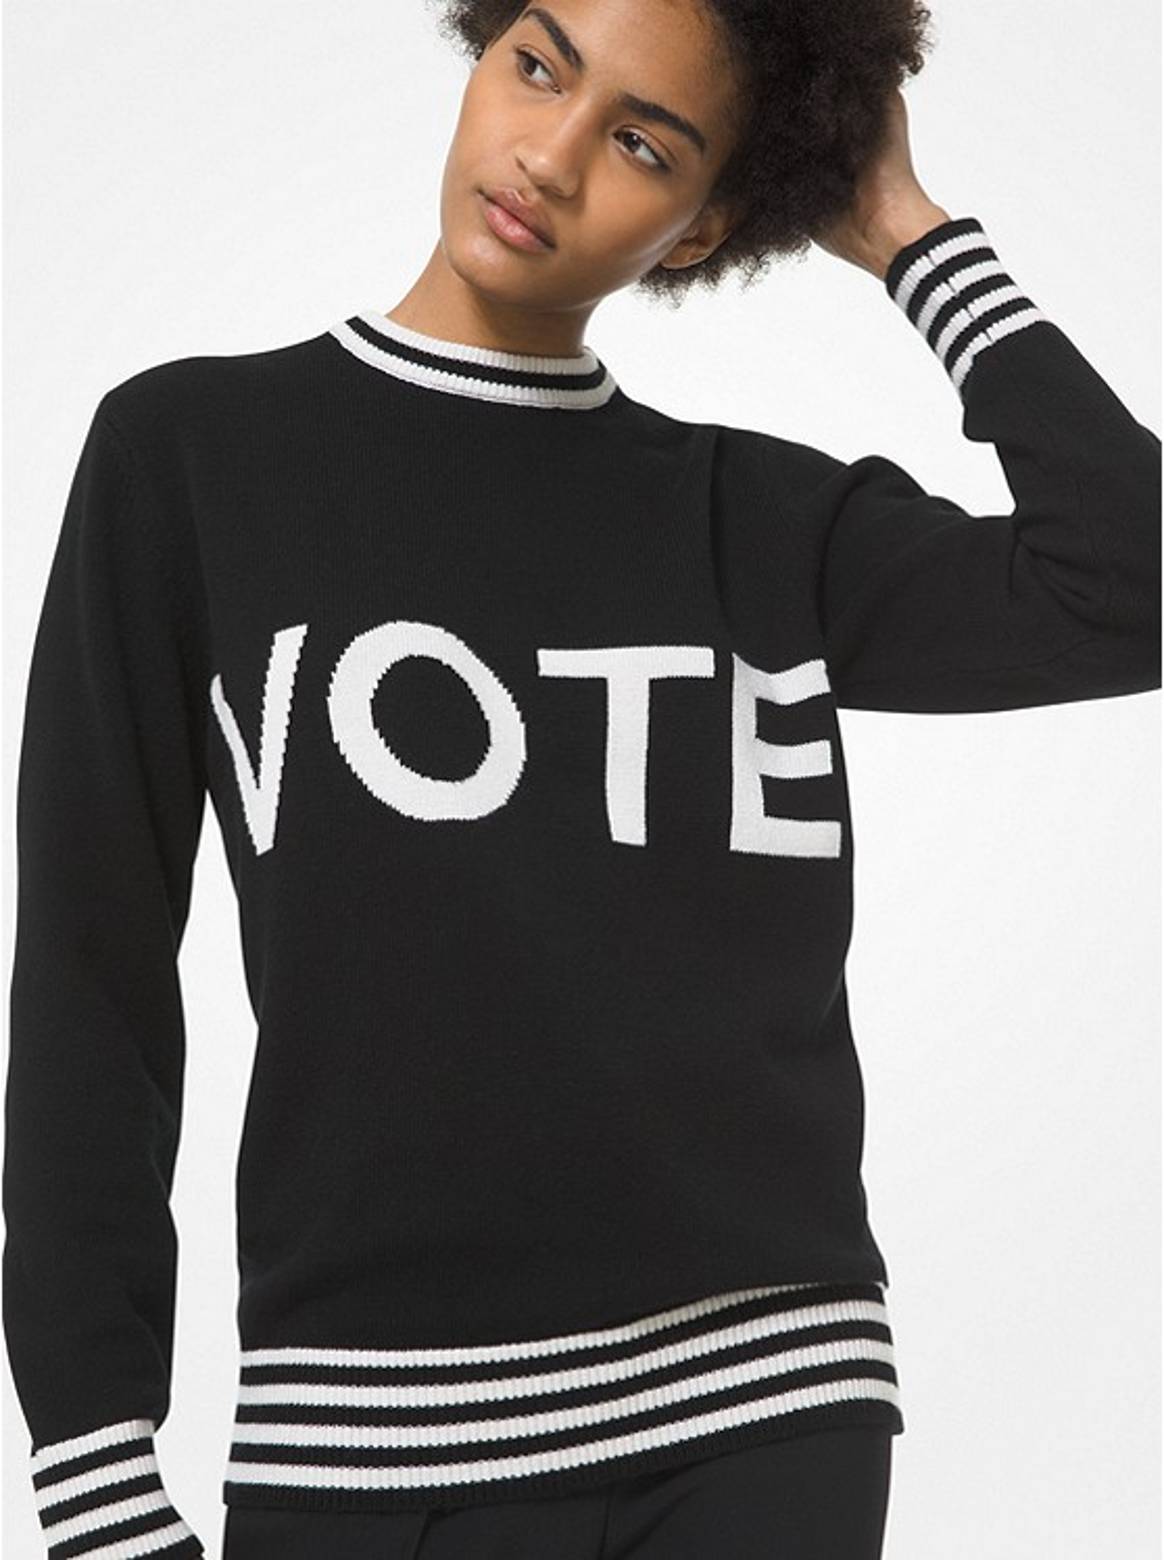 American fashion designers get political, urging people to vote